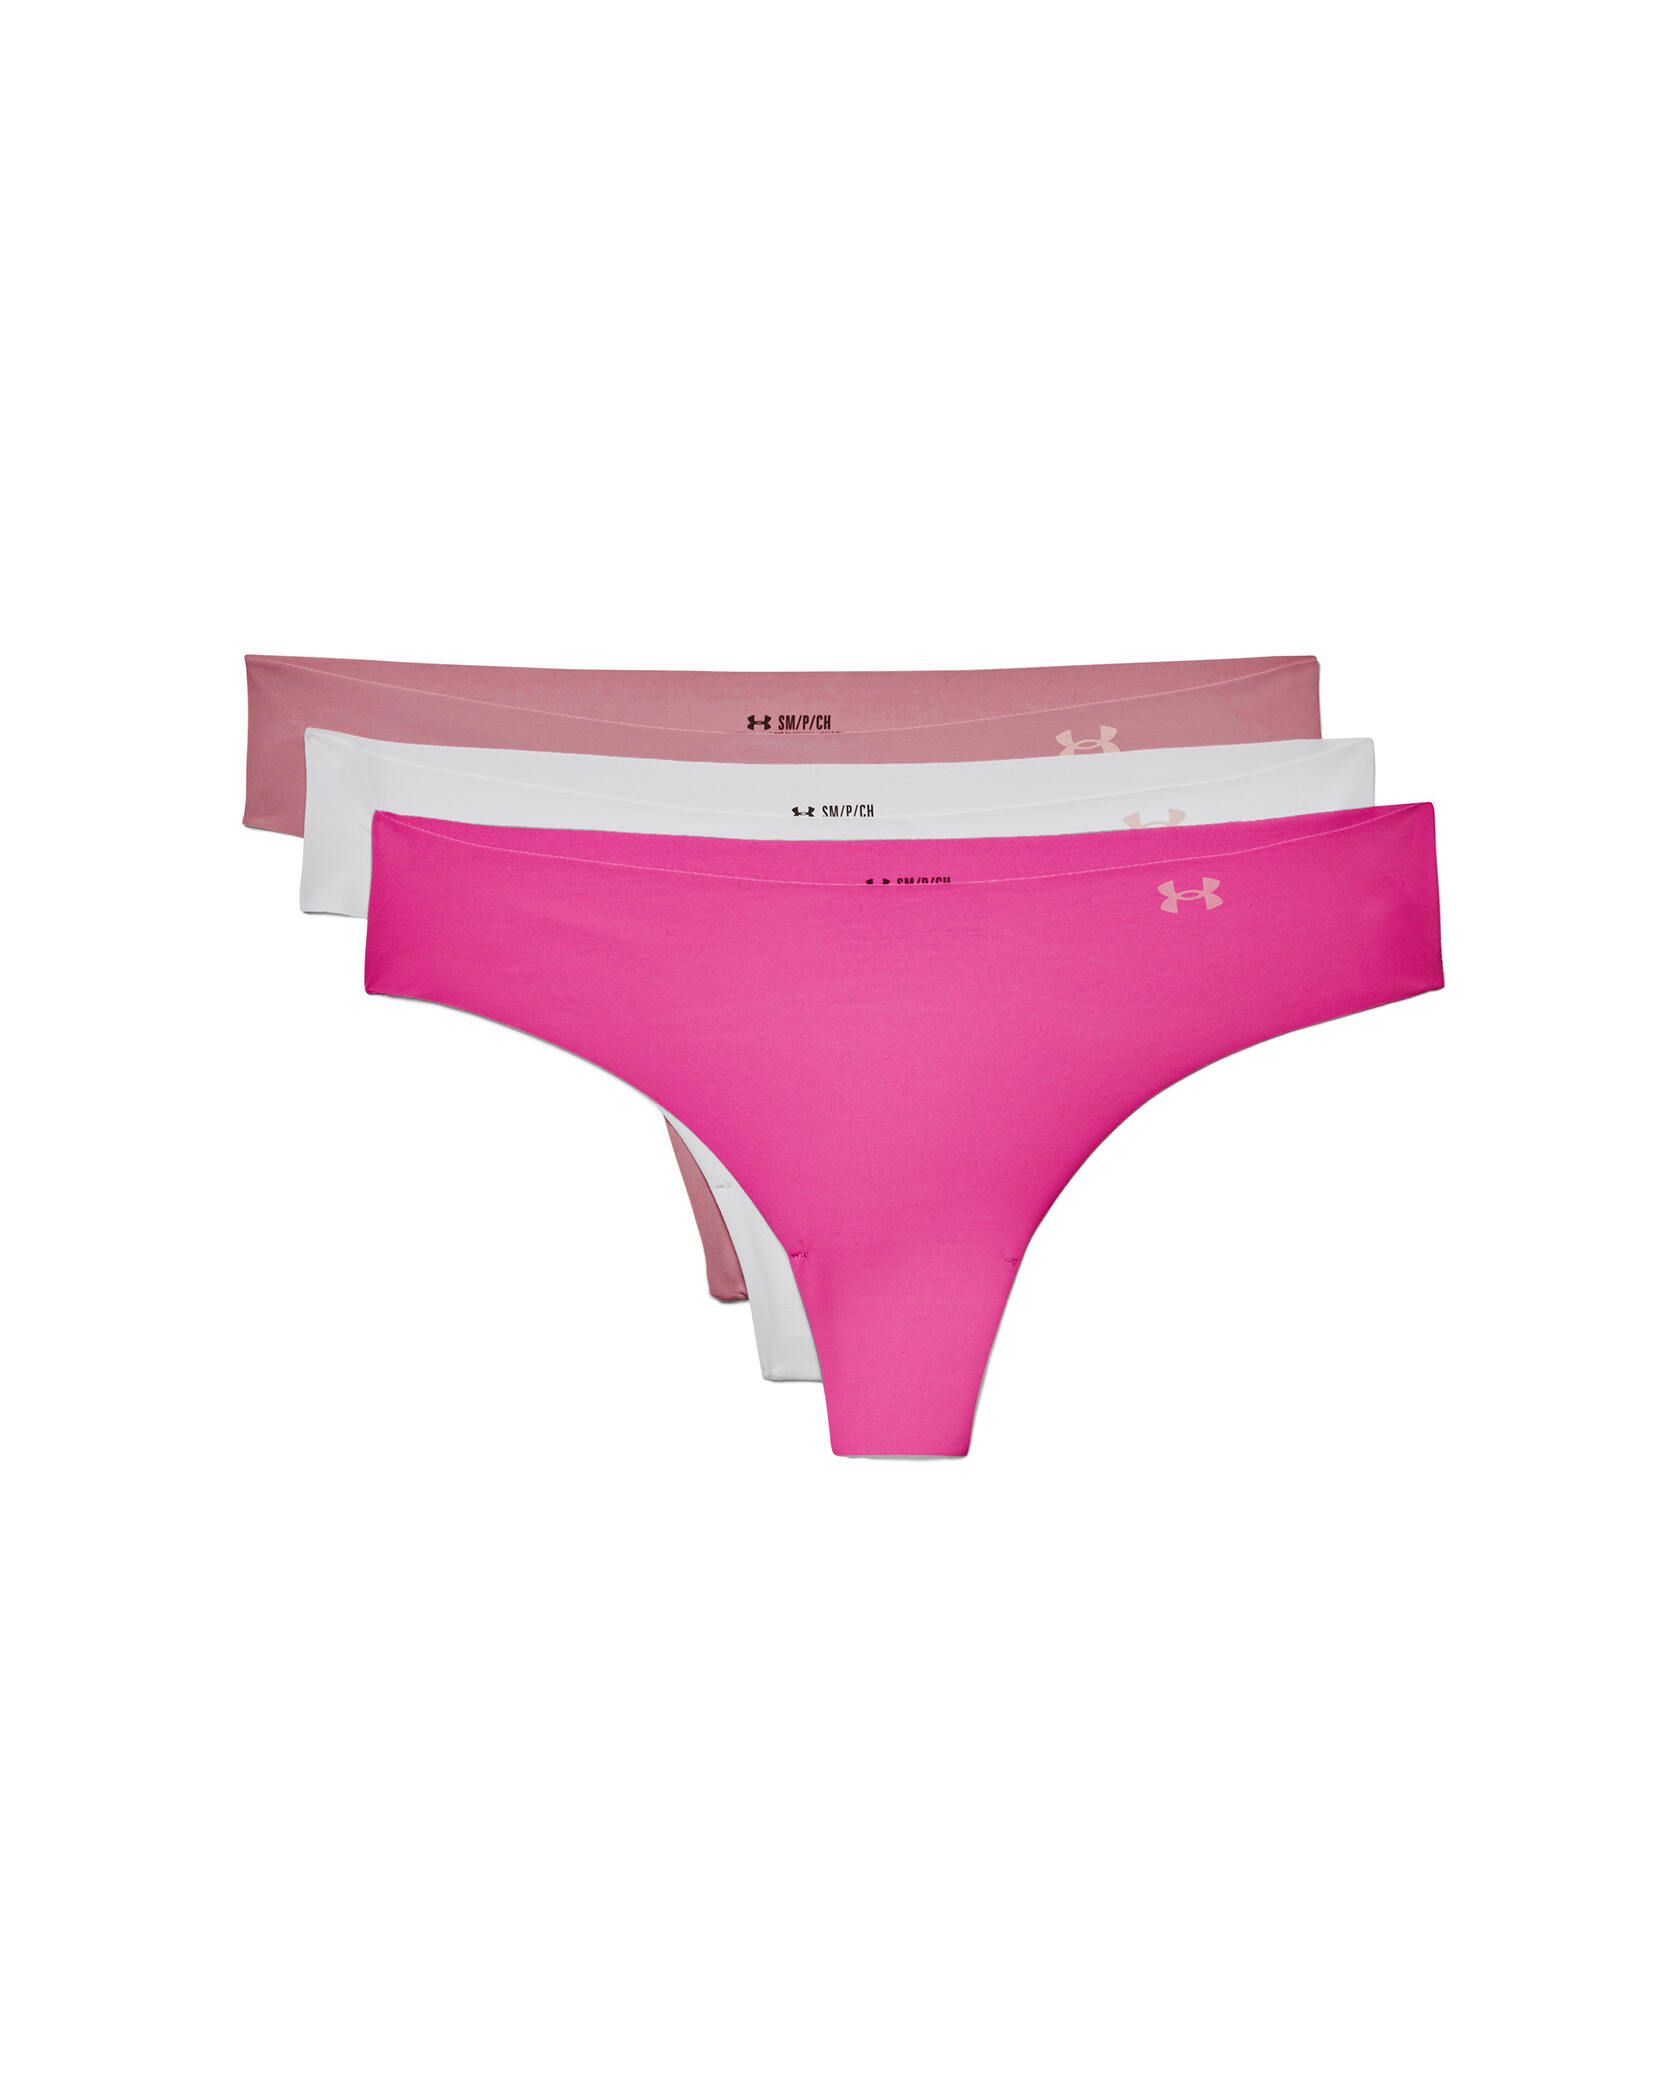 Shop Generic Smooth Briefs Tangas Thongs Underpants Online